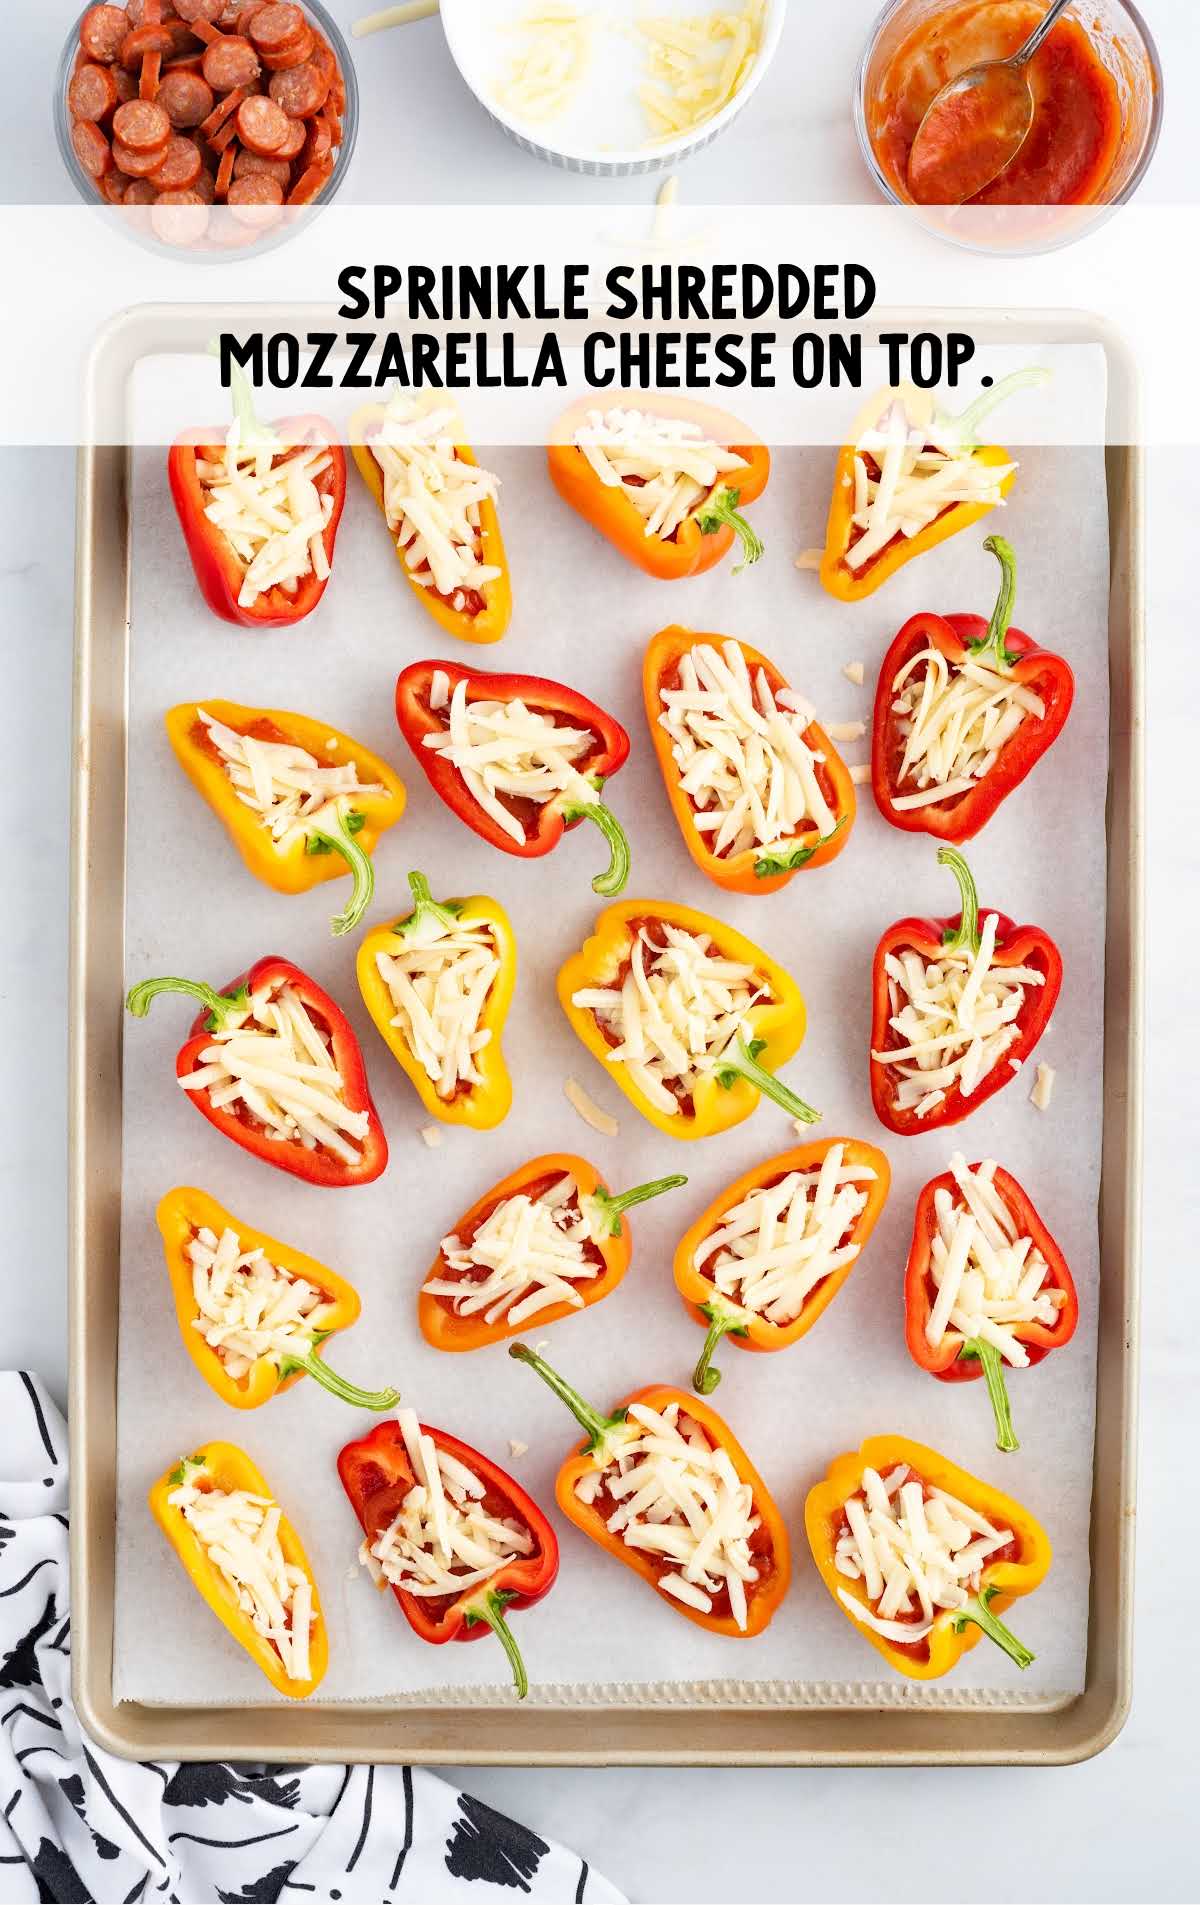 shredded mozzarella cheese sprinkled on top of the pepper pizza bites